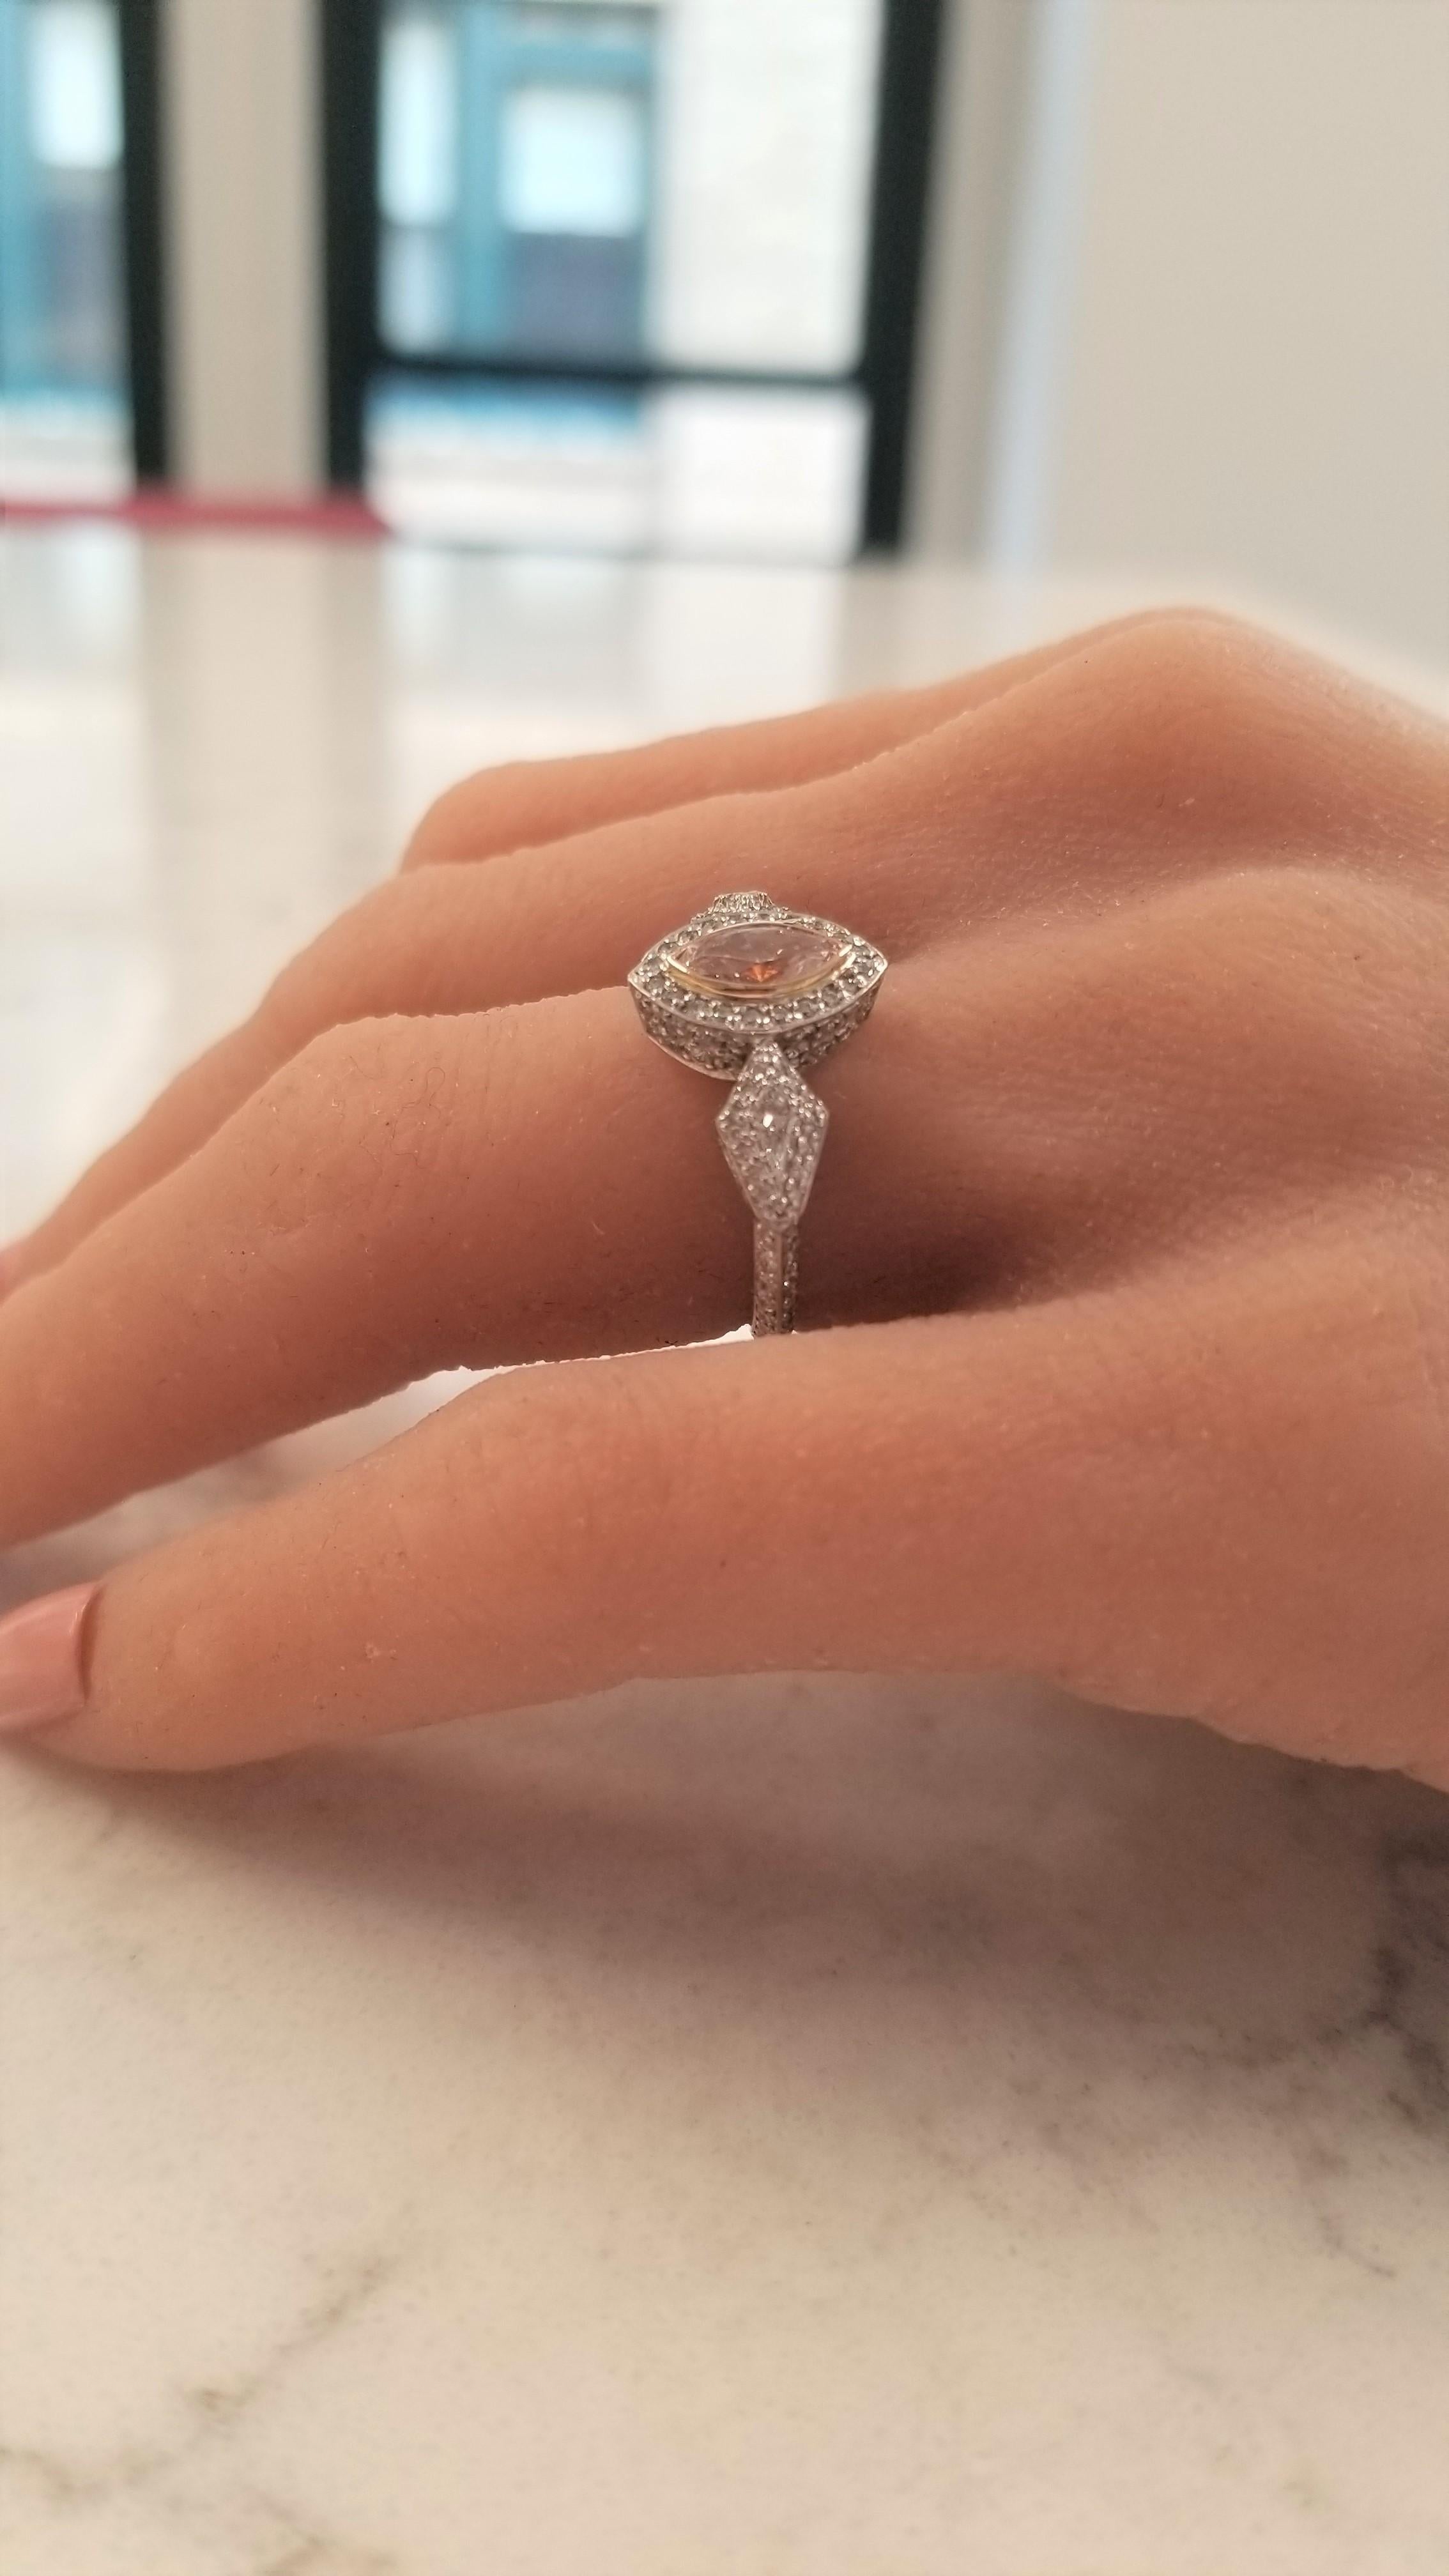 What’s not to love about this spectacular vintage-inspired ring? Set in luxurious platinum & 18 Karat rose gold, this Australian 0.73 carat marquise-cut pink diamond is stunning! The blush color of the center diamond elevates the interest of the